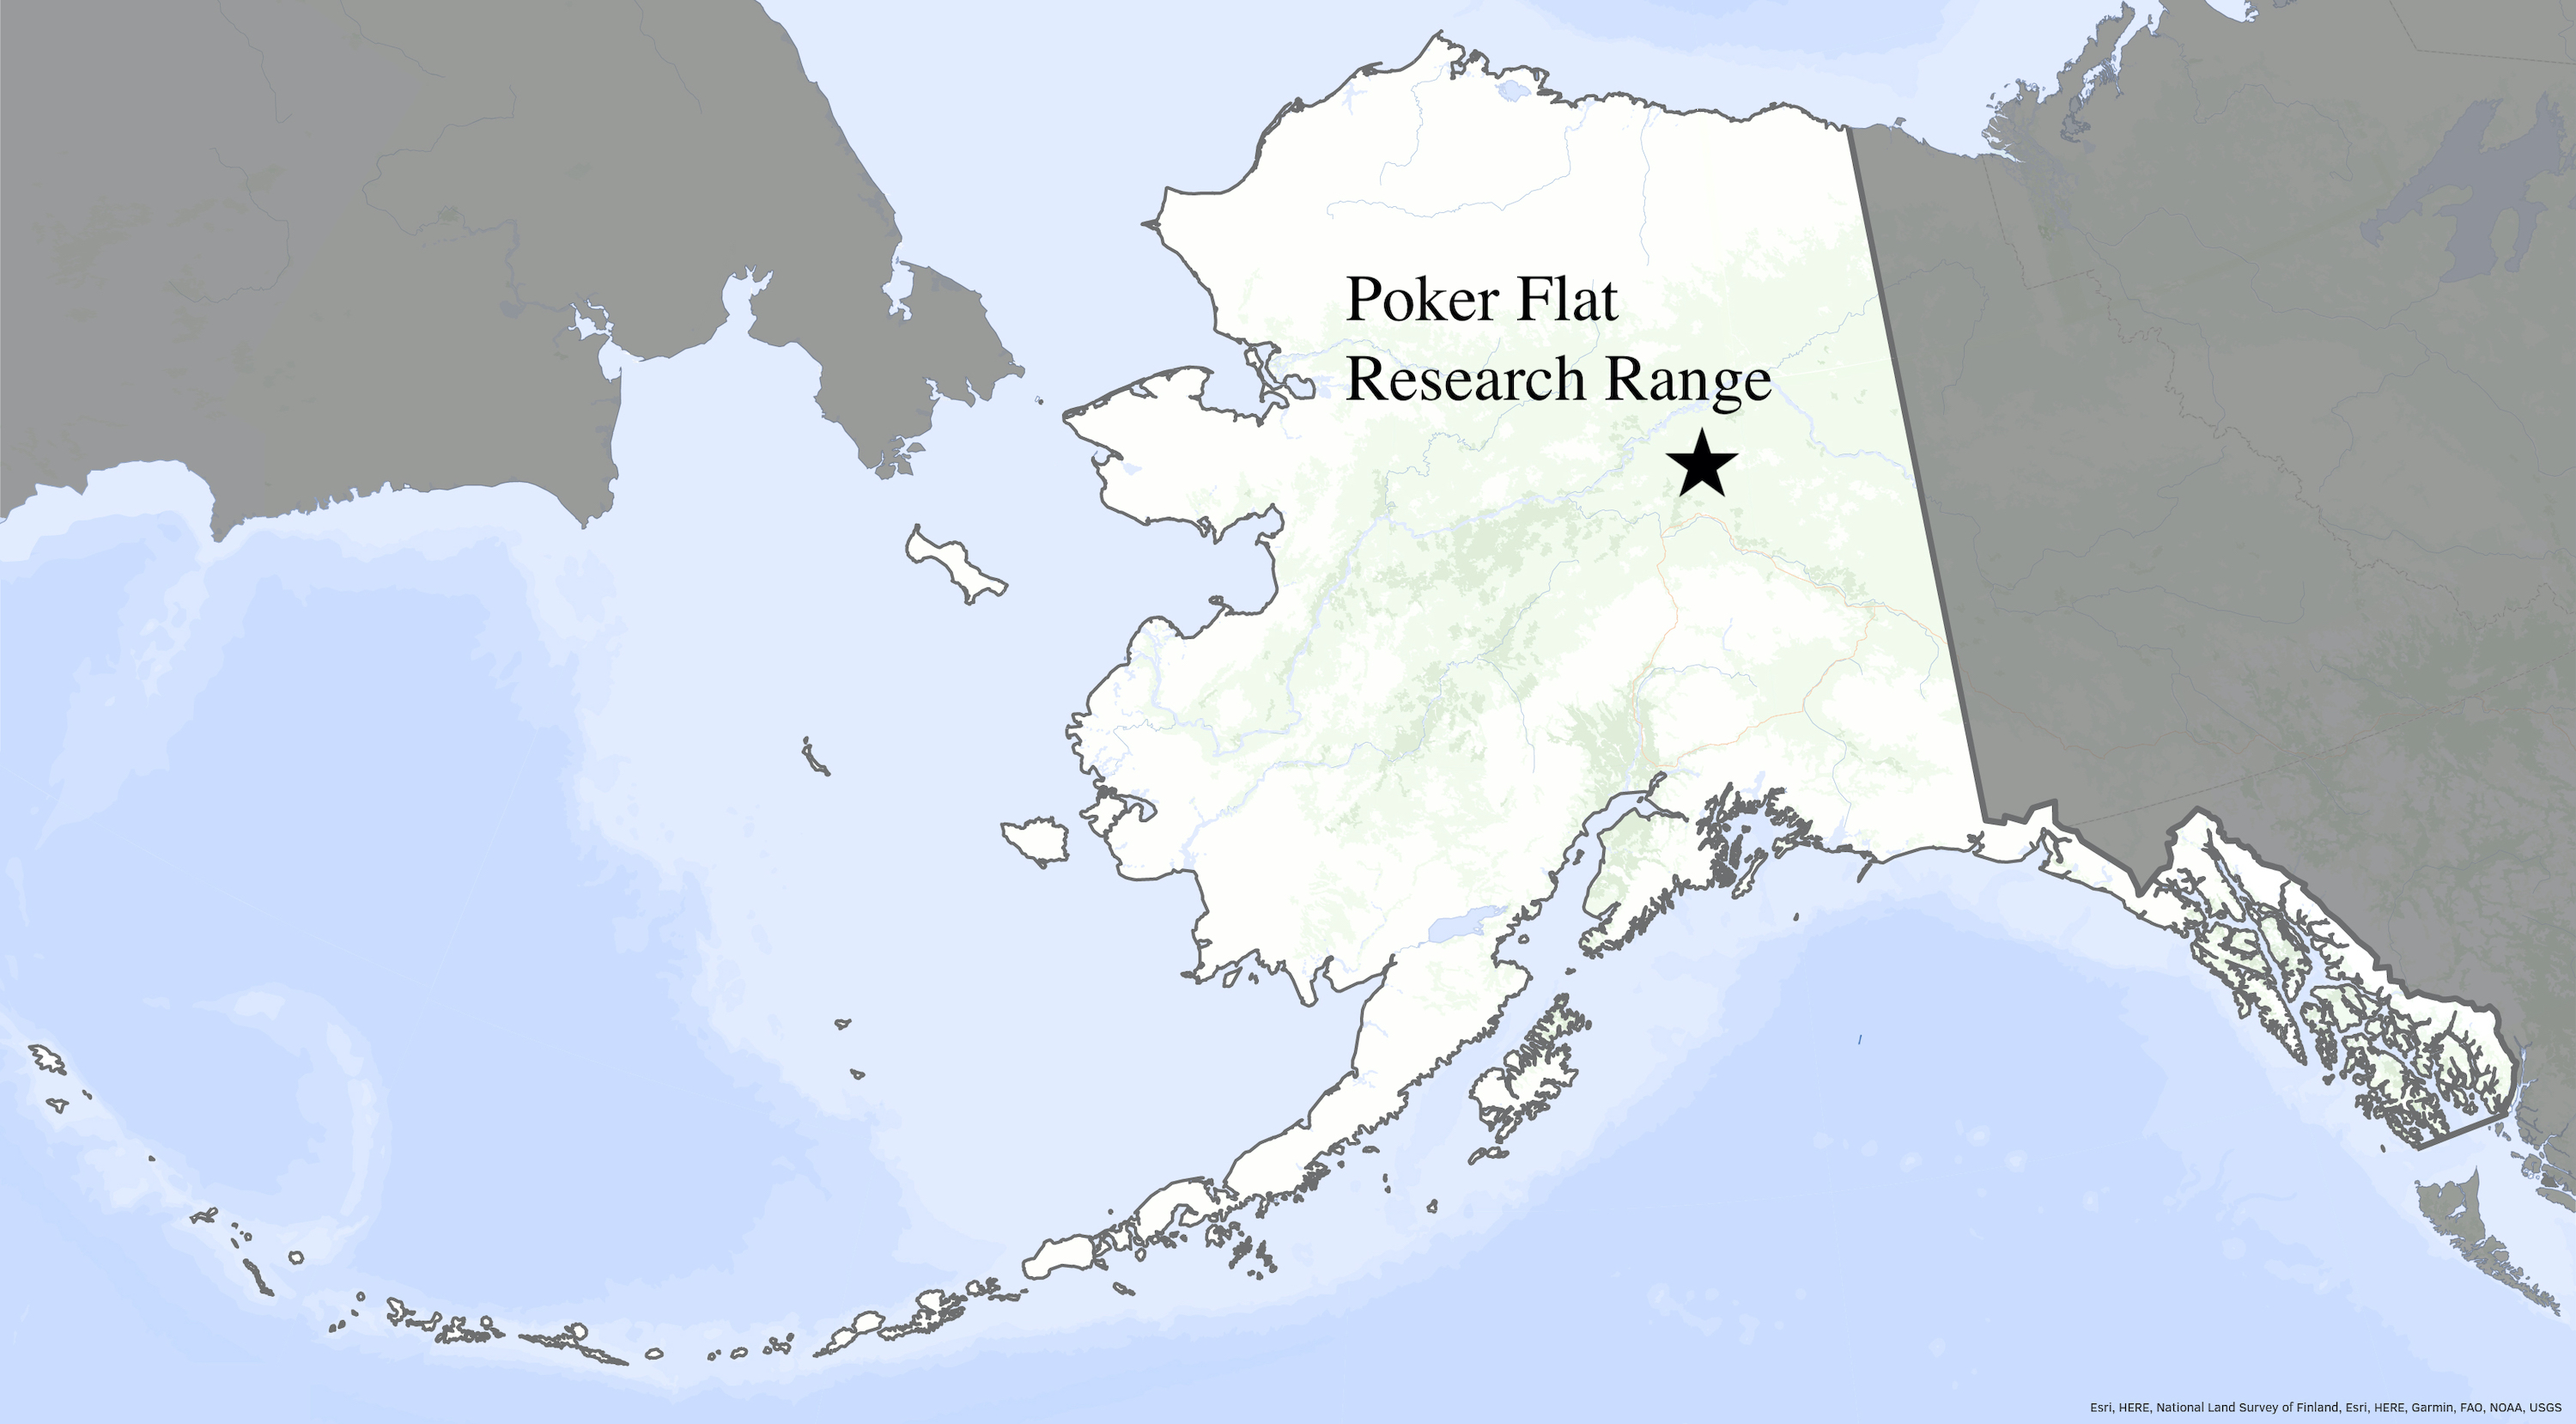 A map shows the location of the Poker Flat Research Range in central Alaska.